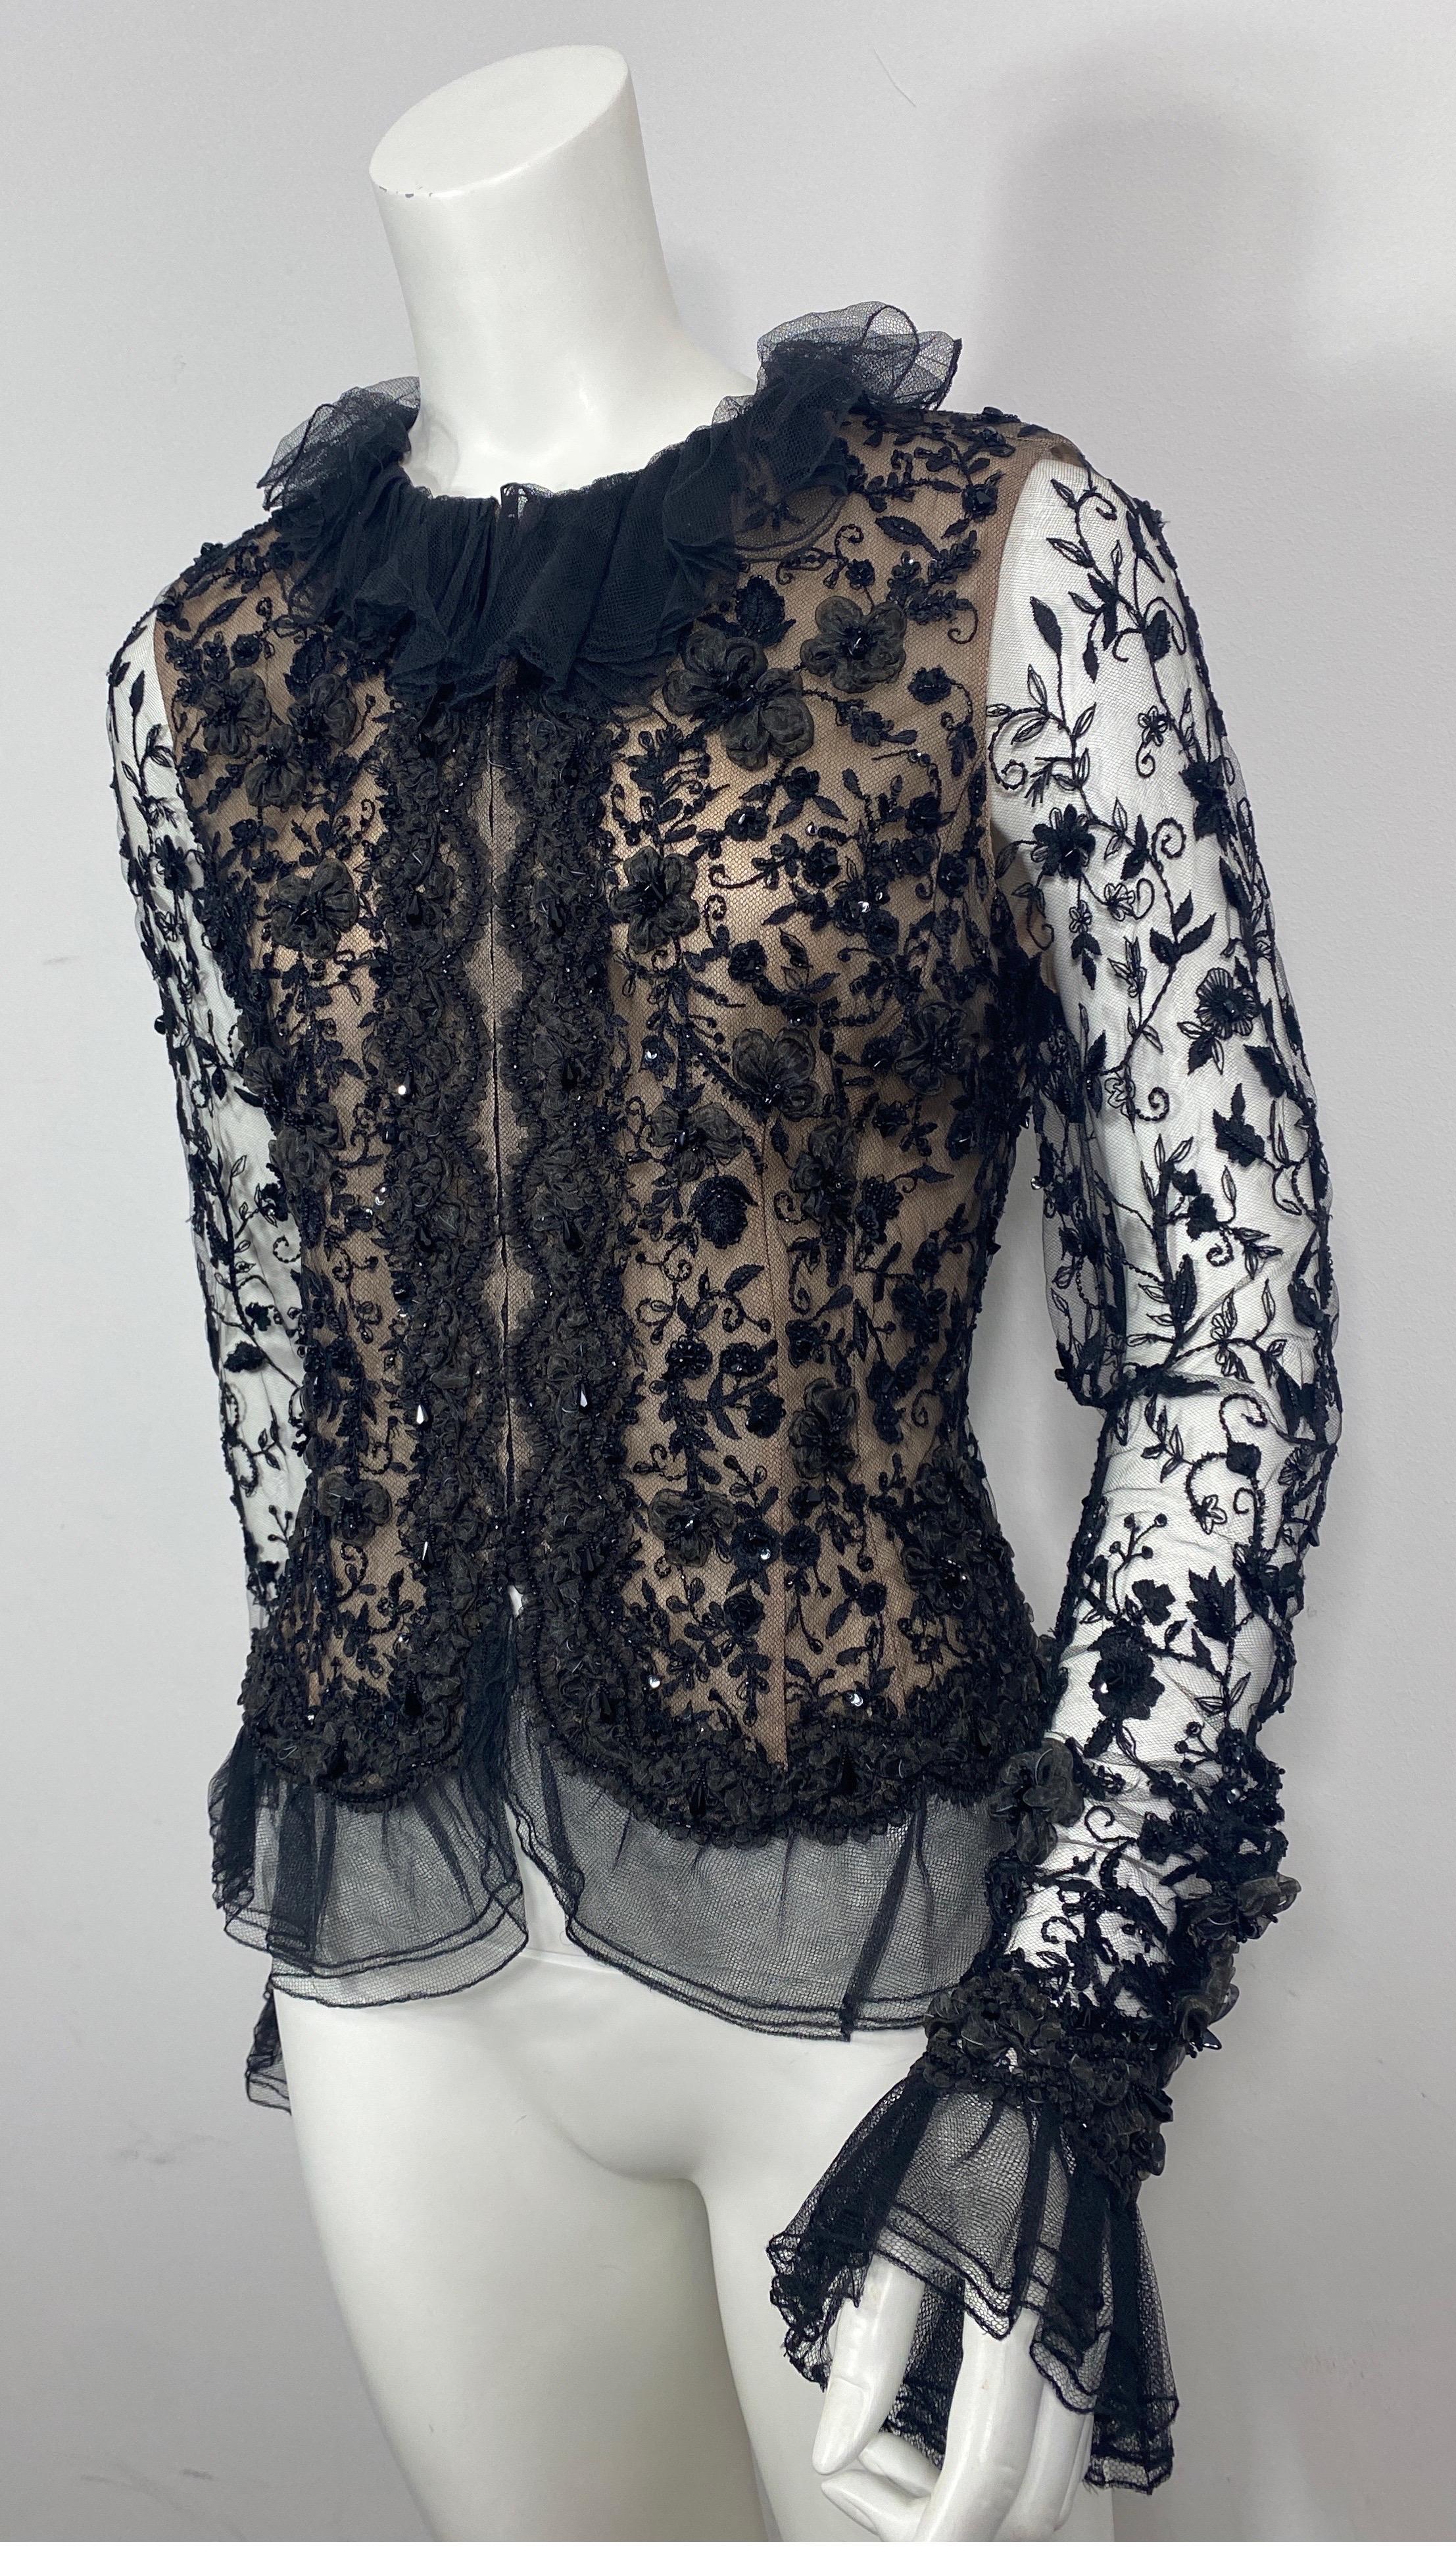 Oscar de La Renta 1980’s Black Lace Embellished Beaded Top Jacket-Size 10 In Excellent Condition For Sale In West Palm Beach, FL